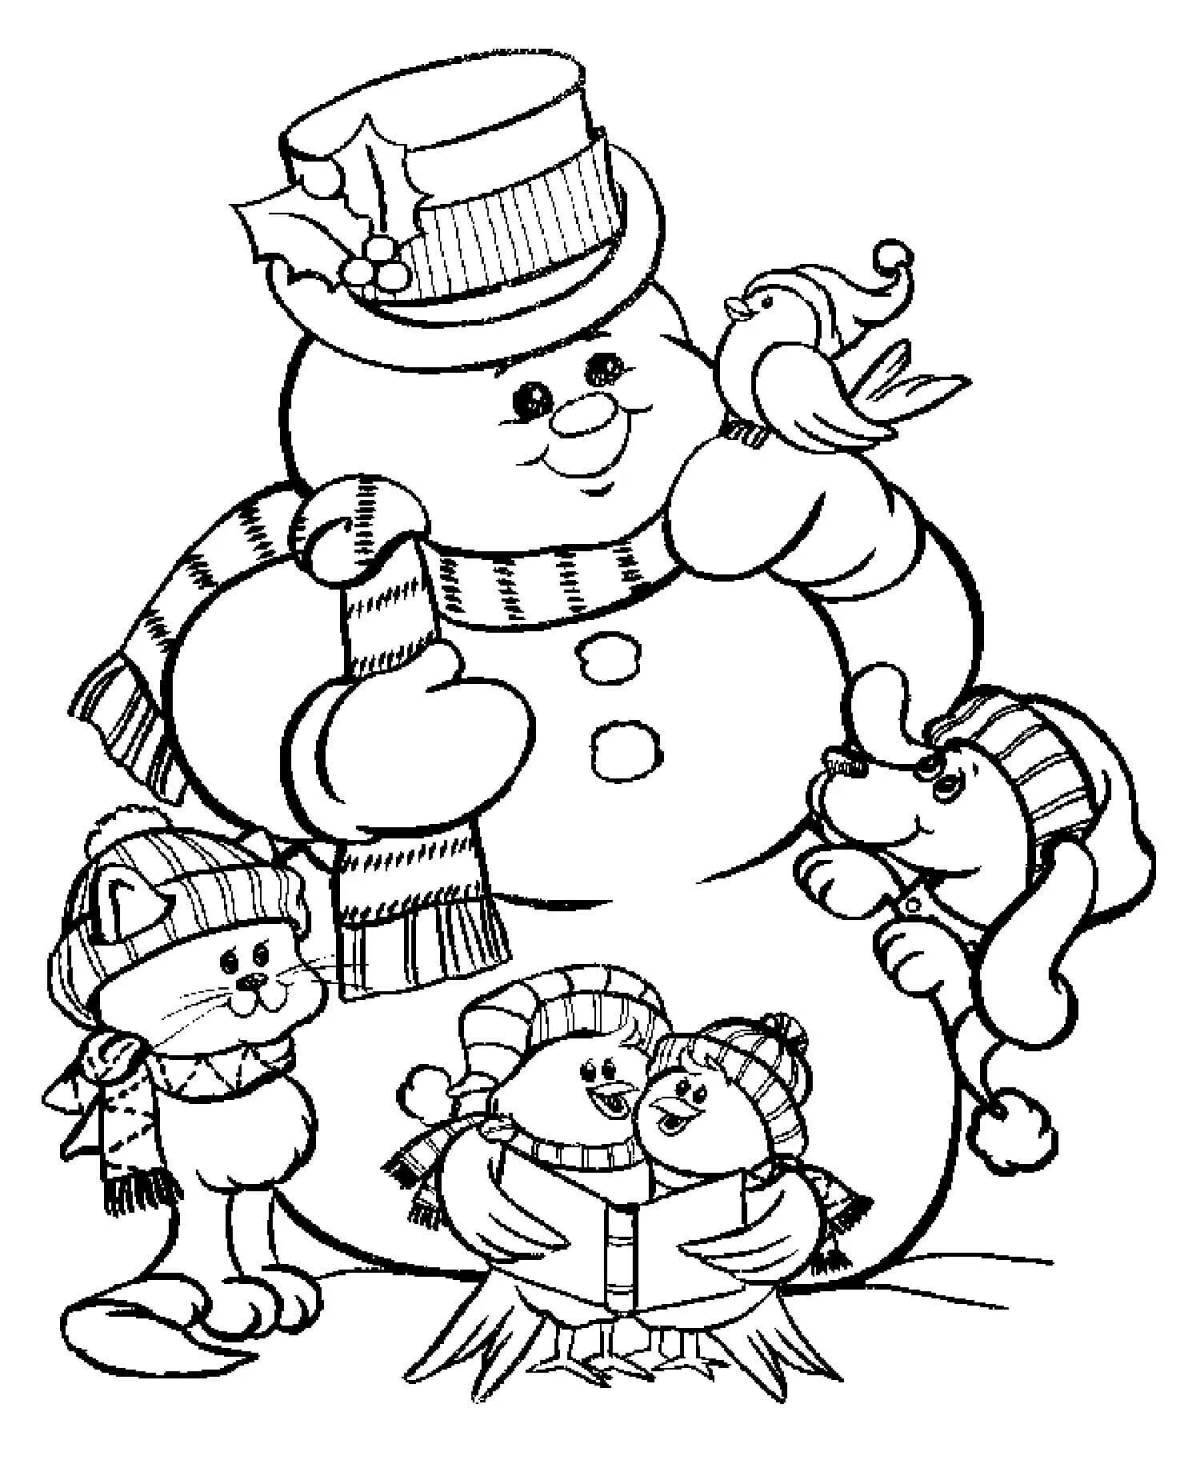 Sparkling Christmas snowman coloring page